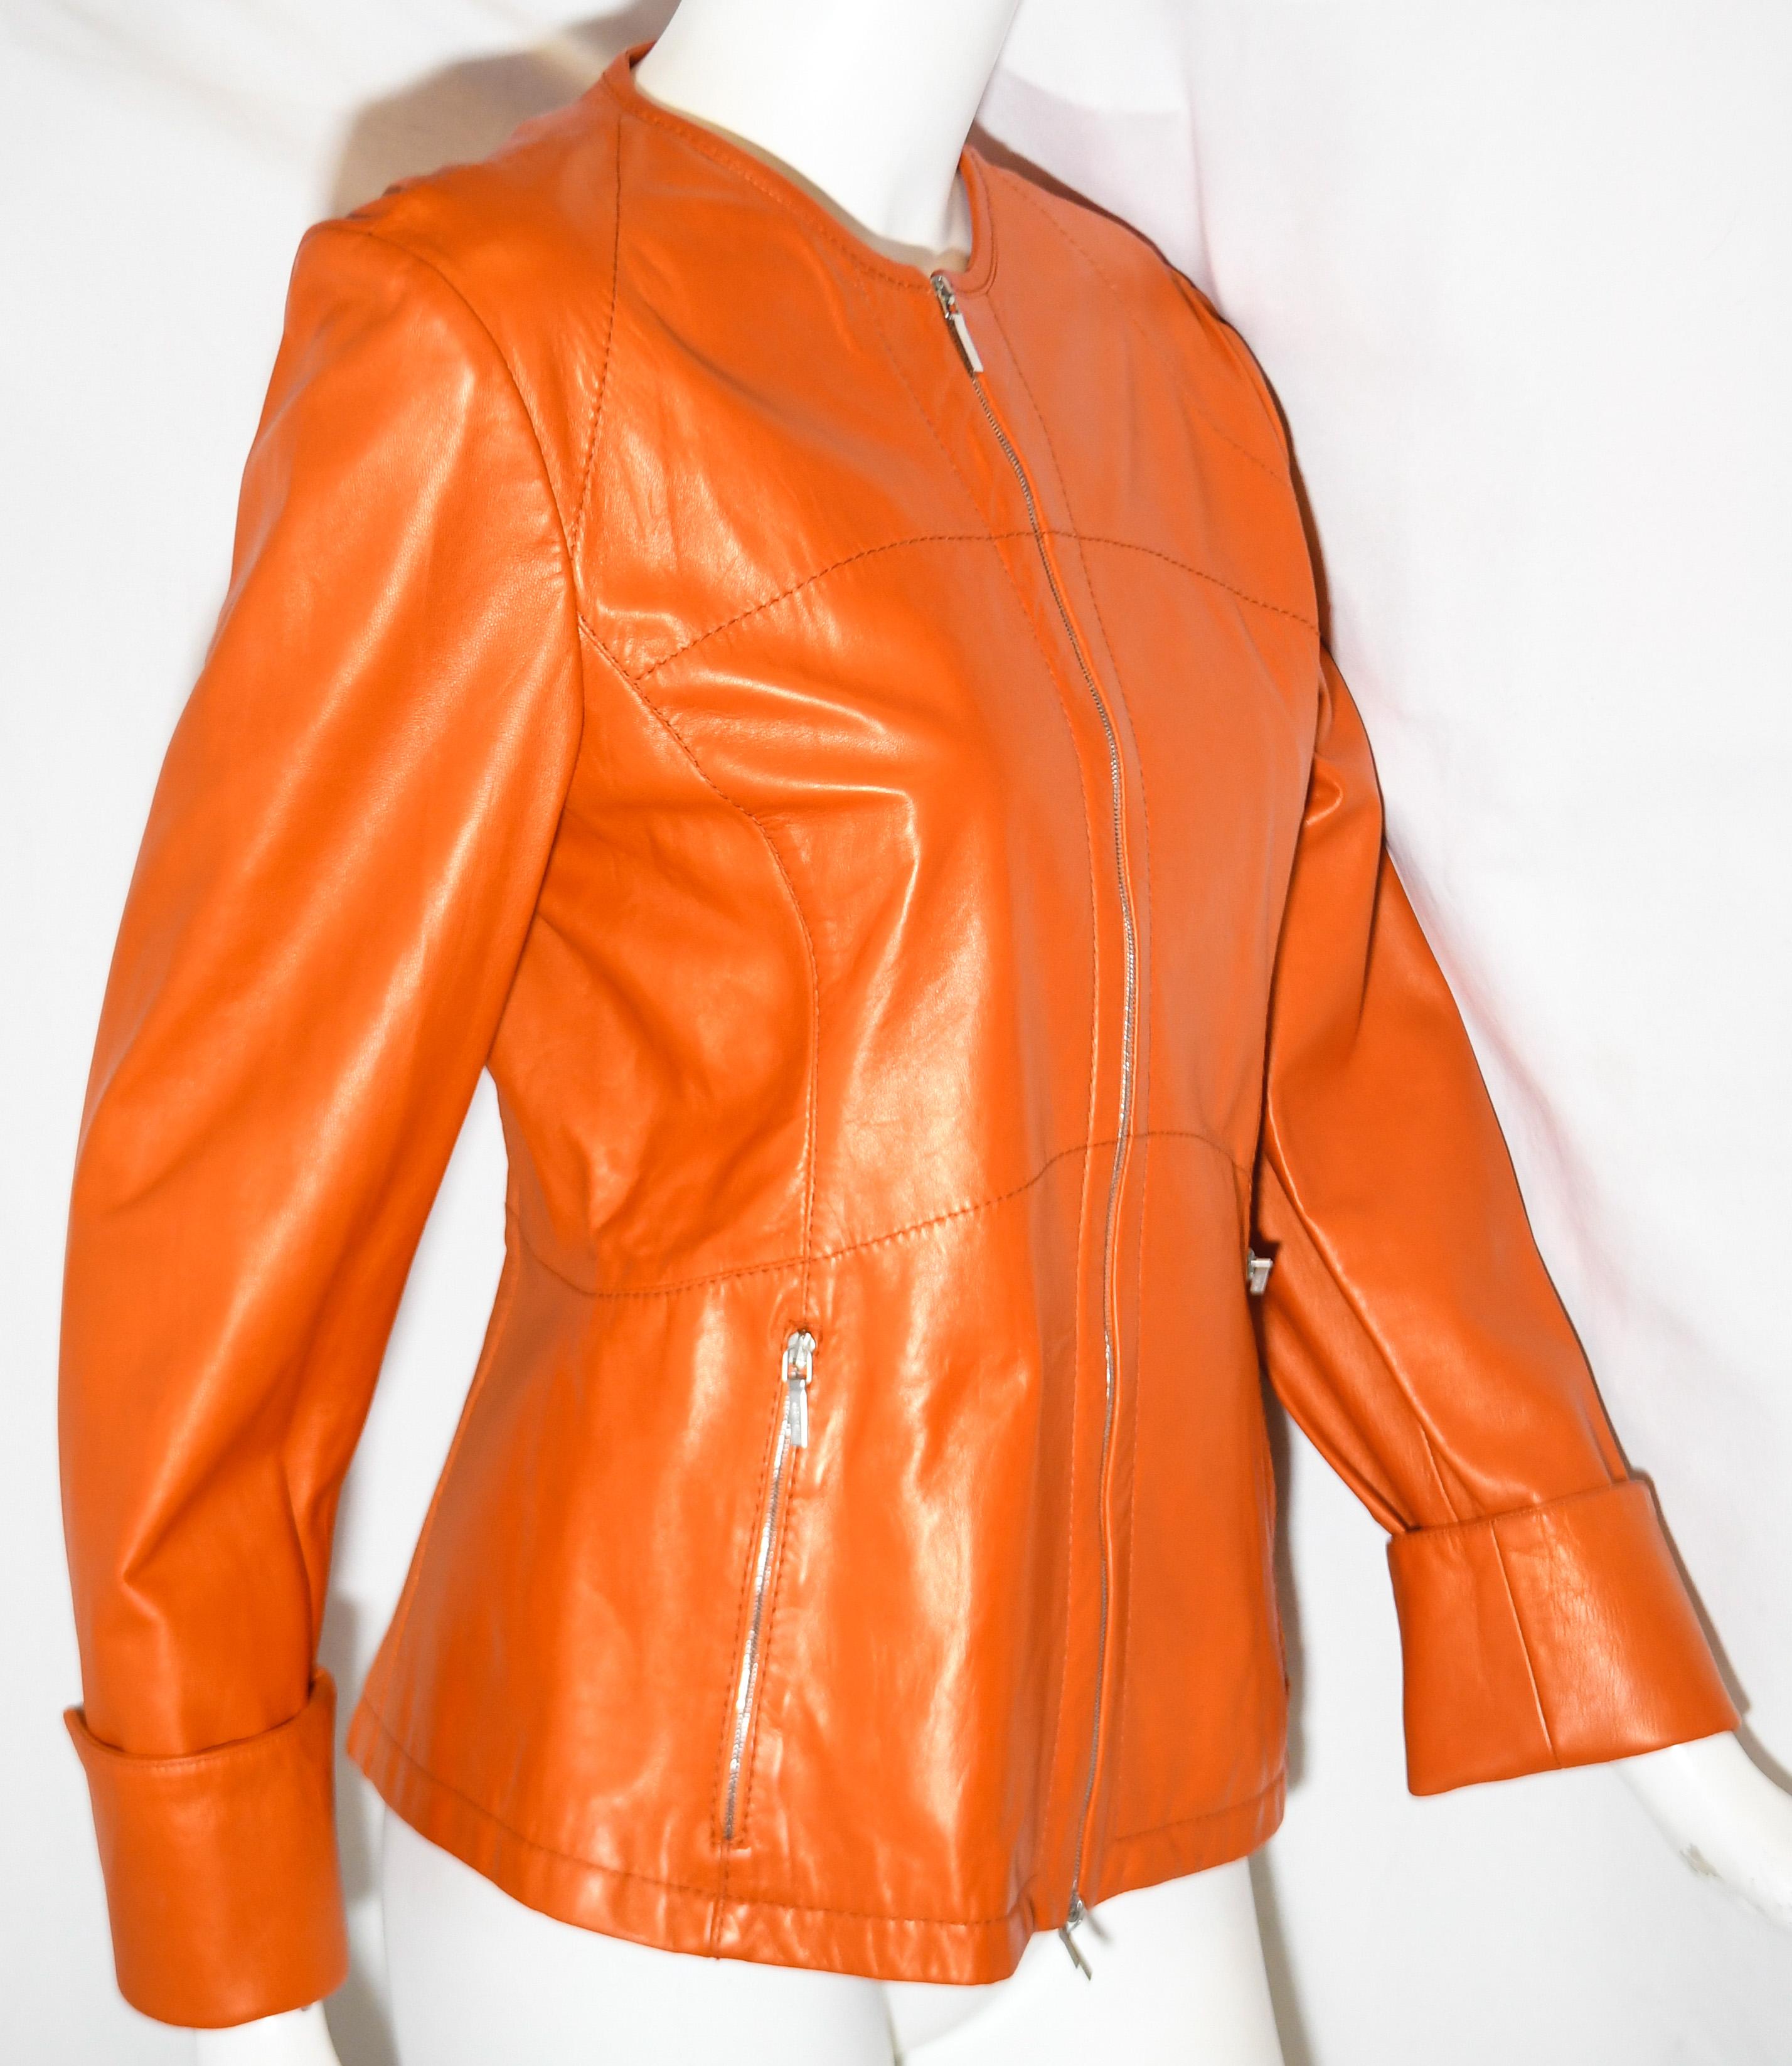 Jil Sander orange leather jacket is fit to the body and includes one silver tone front zipper for closure and two silver tone side zippers one for each pocket.  This jacket is expertly created in Italy.  Jacket is lined in orange fabric.  This round